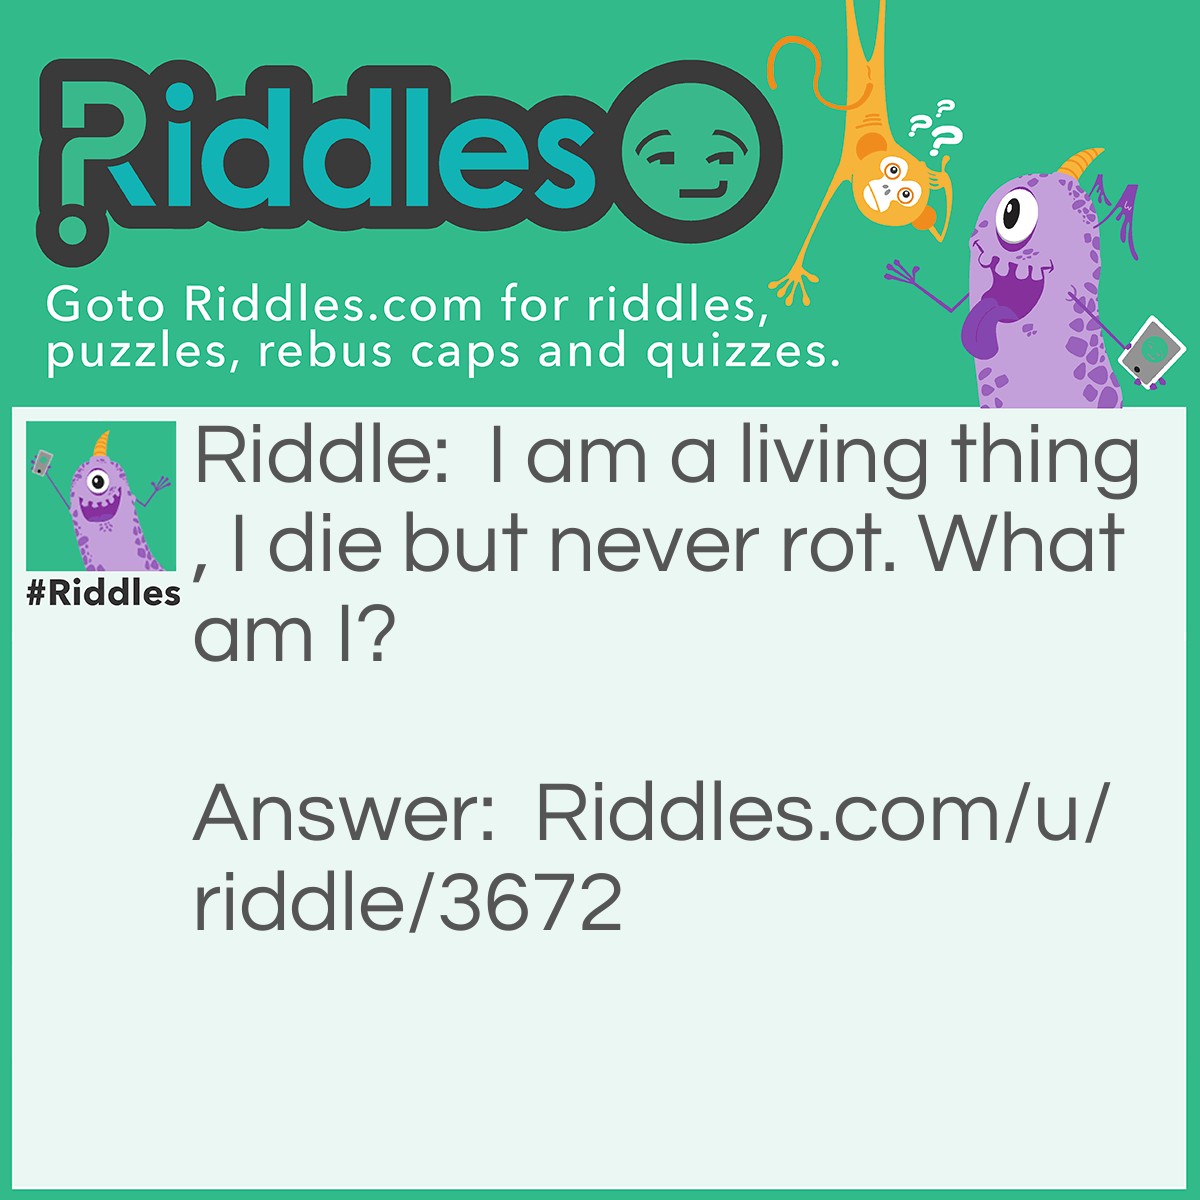 Riddle: I am a living thing, I die but never rot. What am I? Answer: A spider.